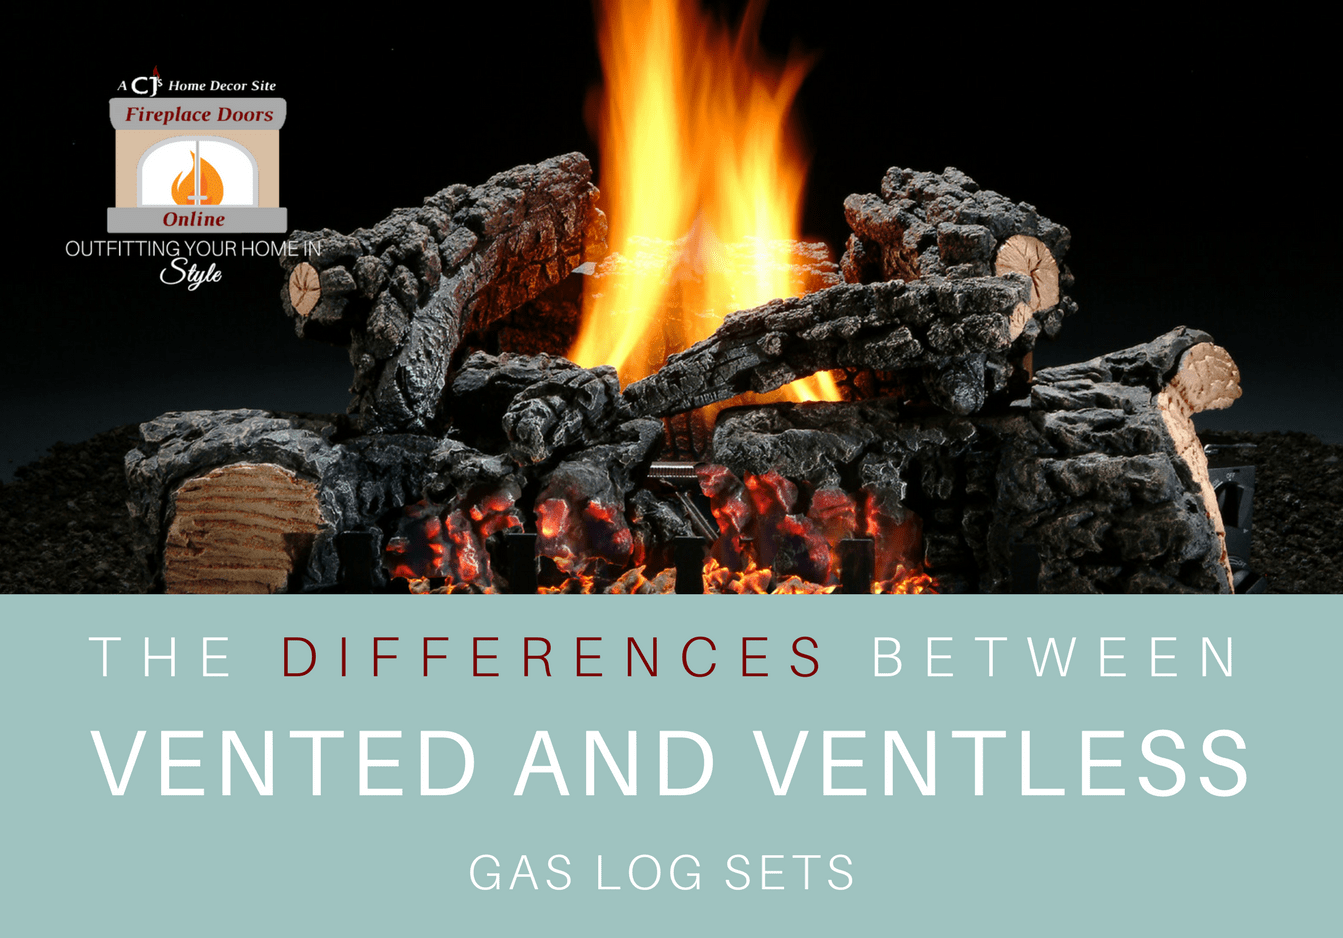 Vented And Ventless Gas Log Sets, Compare Vented And Ventless Gas Fireplaces